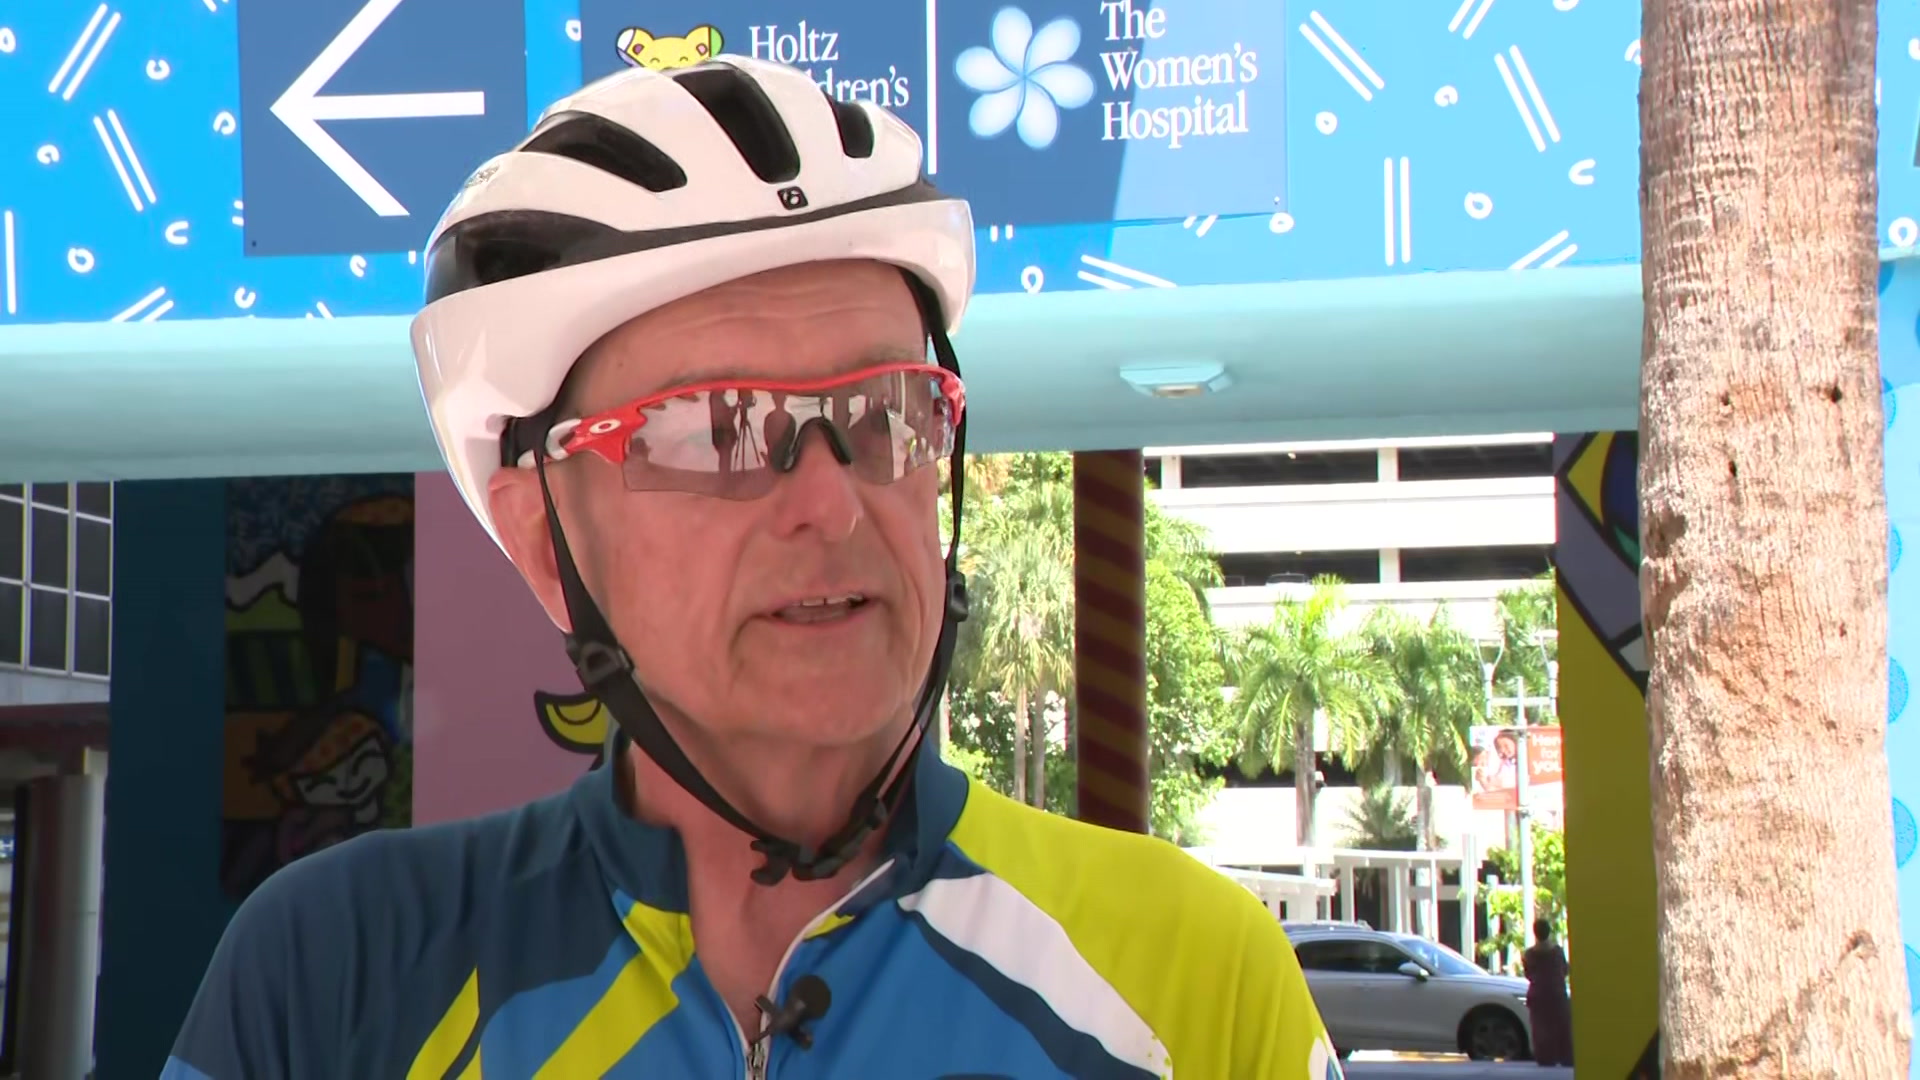 Cancer Survivor Bikes Through South Florida To Encourage People to ‘Be The Match’